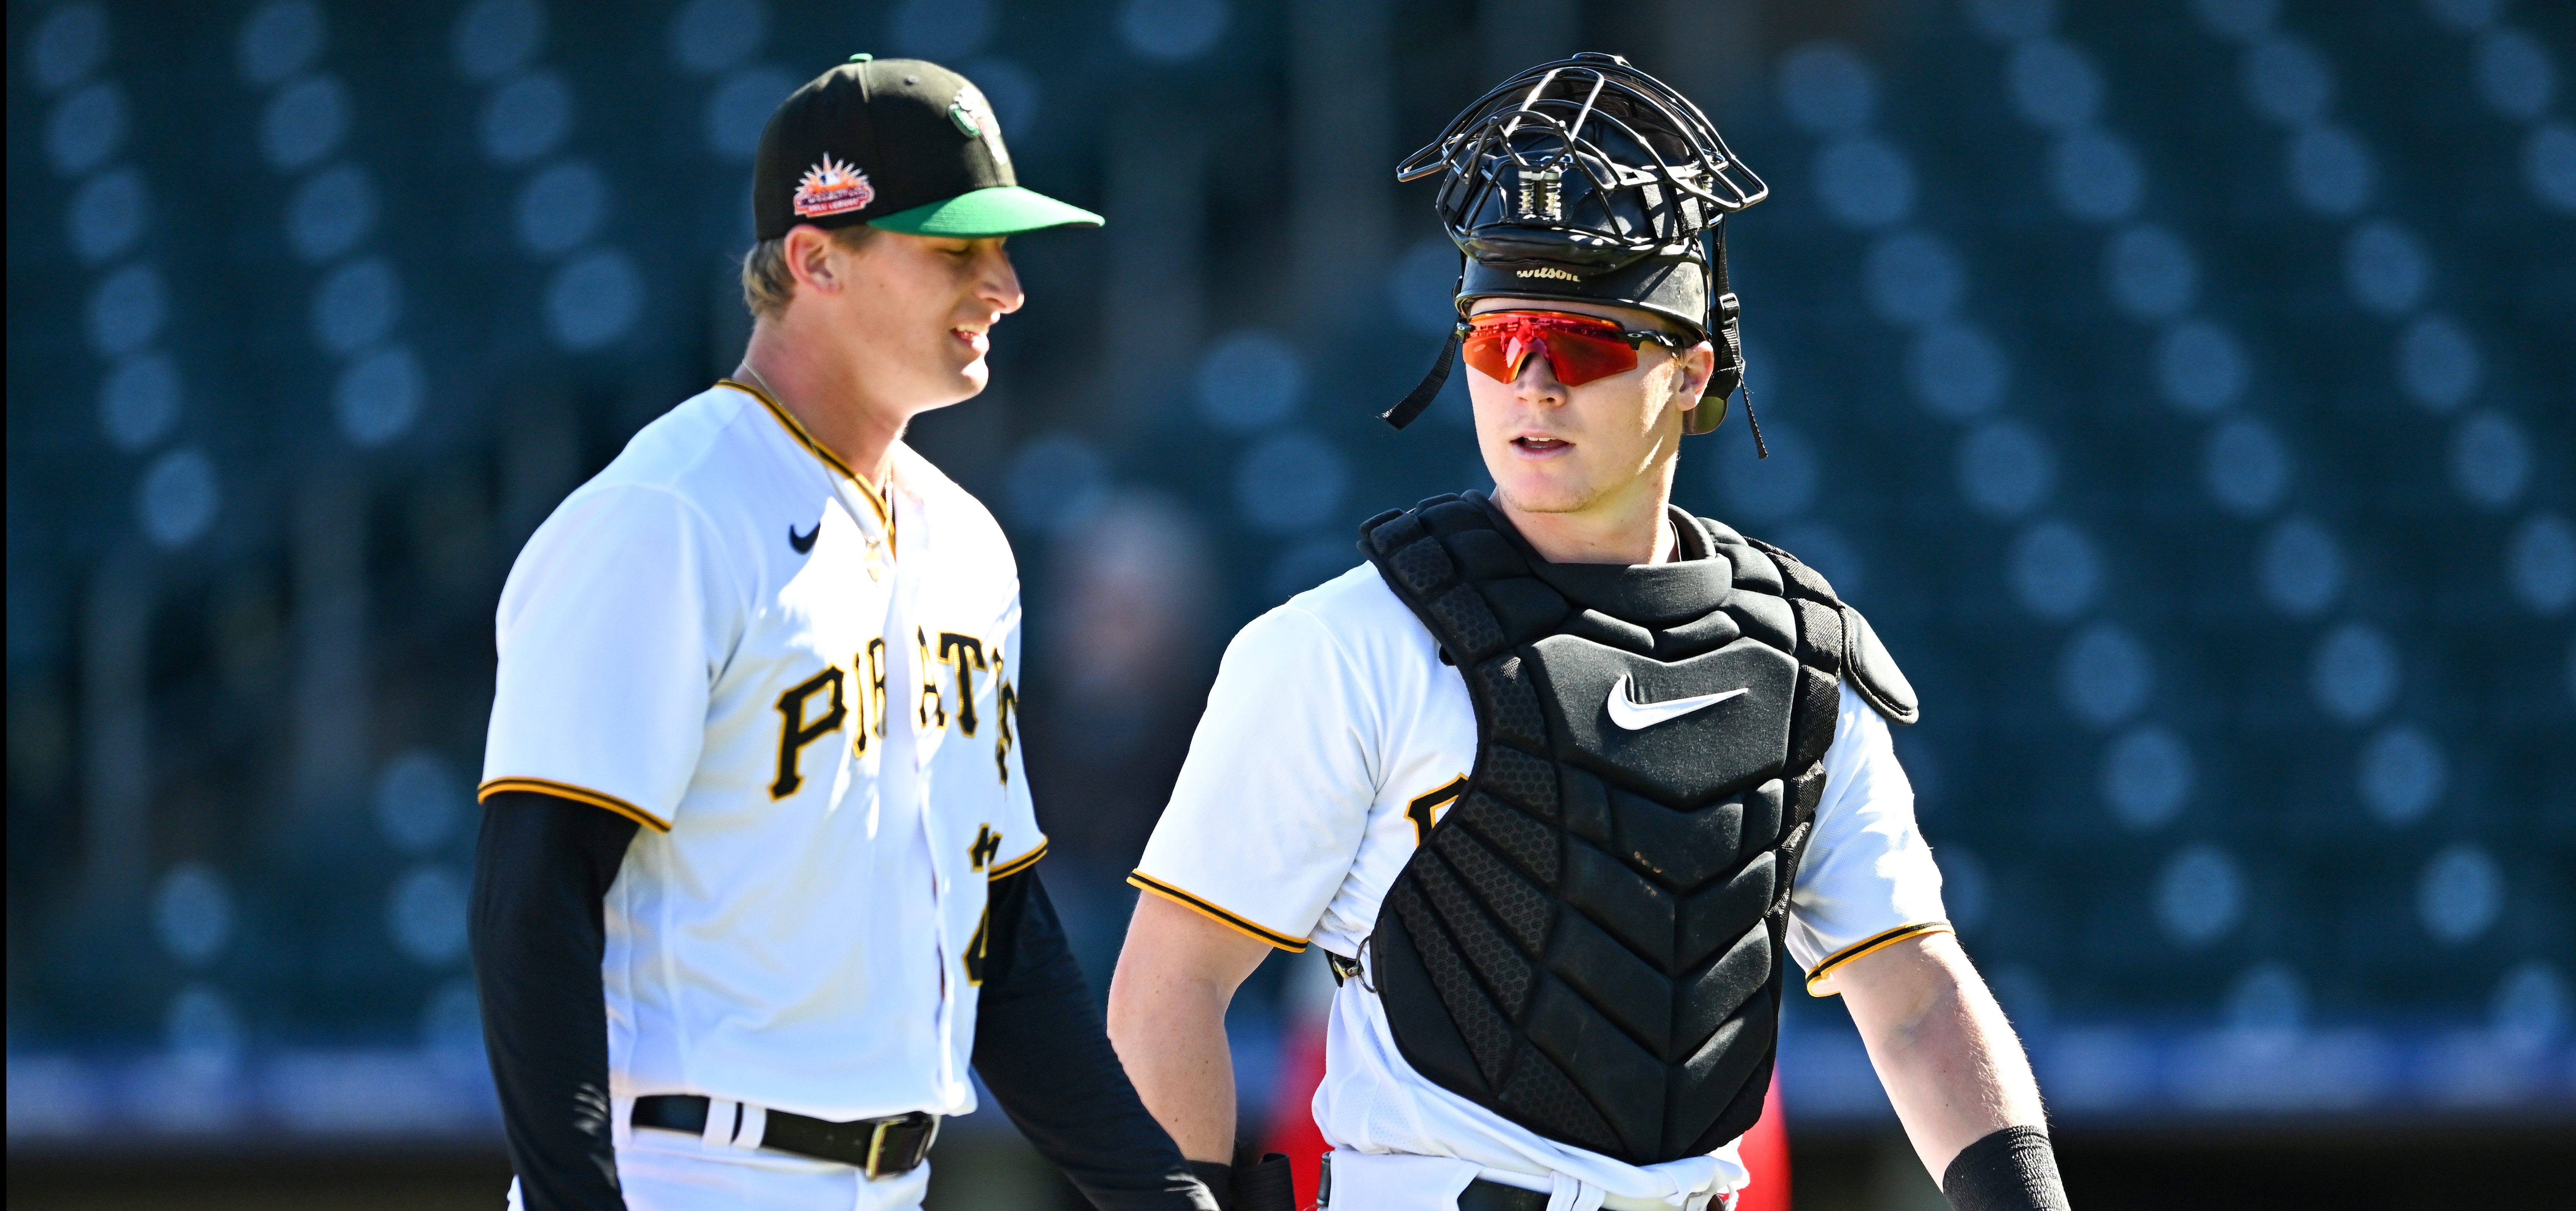 Top 10 Best Pittsburgh Pirates Players of all time - Ranked